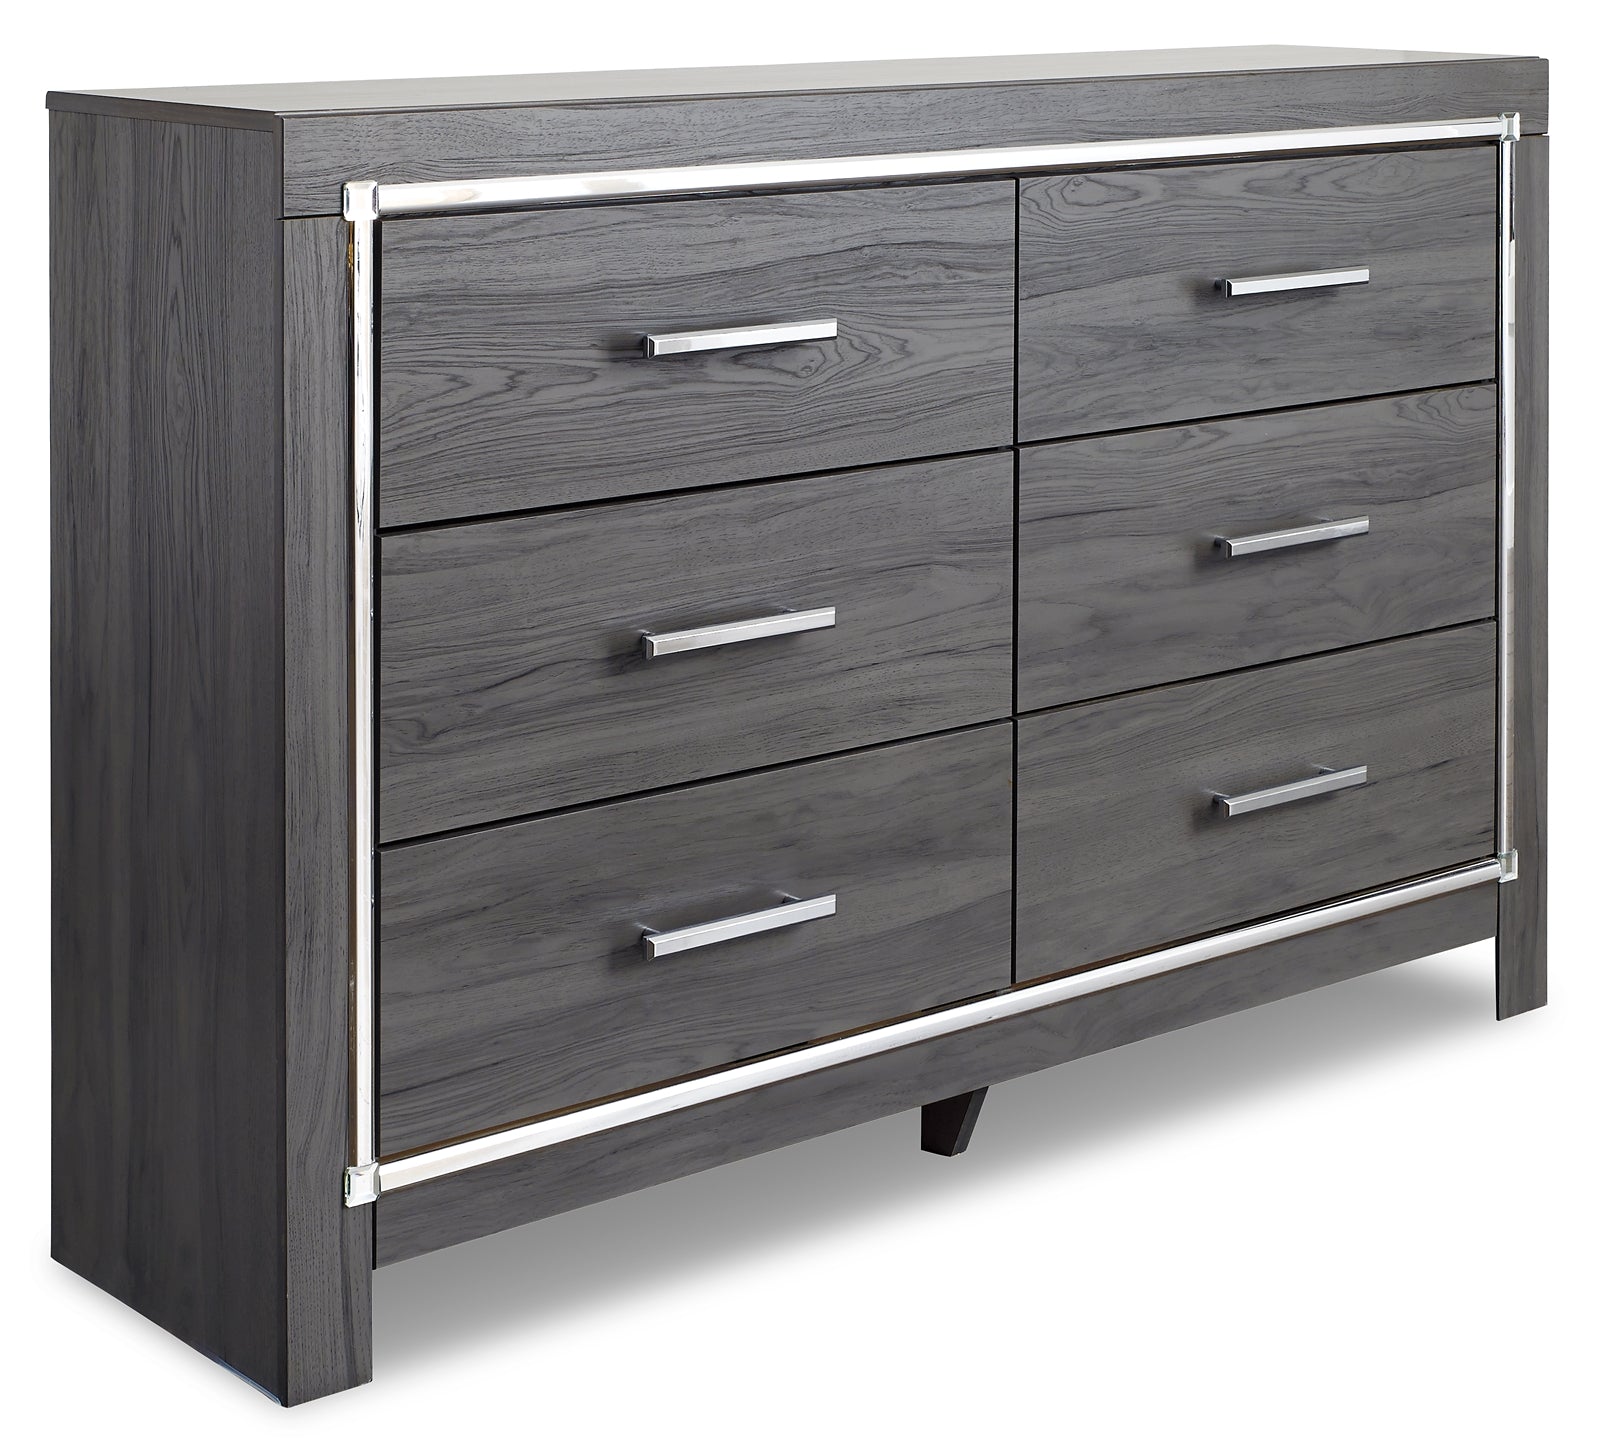 Lodanna Queen Panel Bed with Dresser at Cloud 9 Mattress & Furniture furniture, home furnishing, home decor